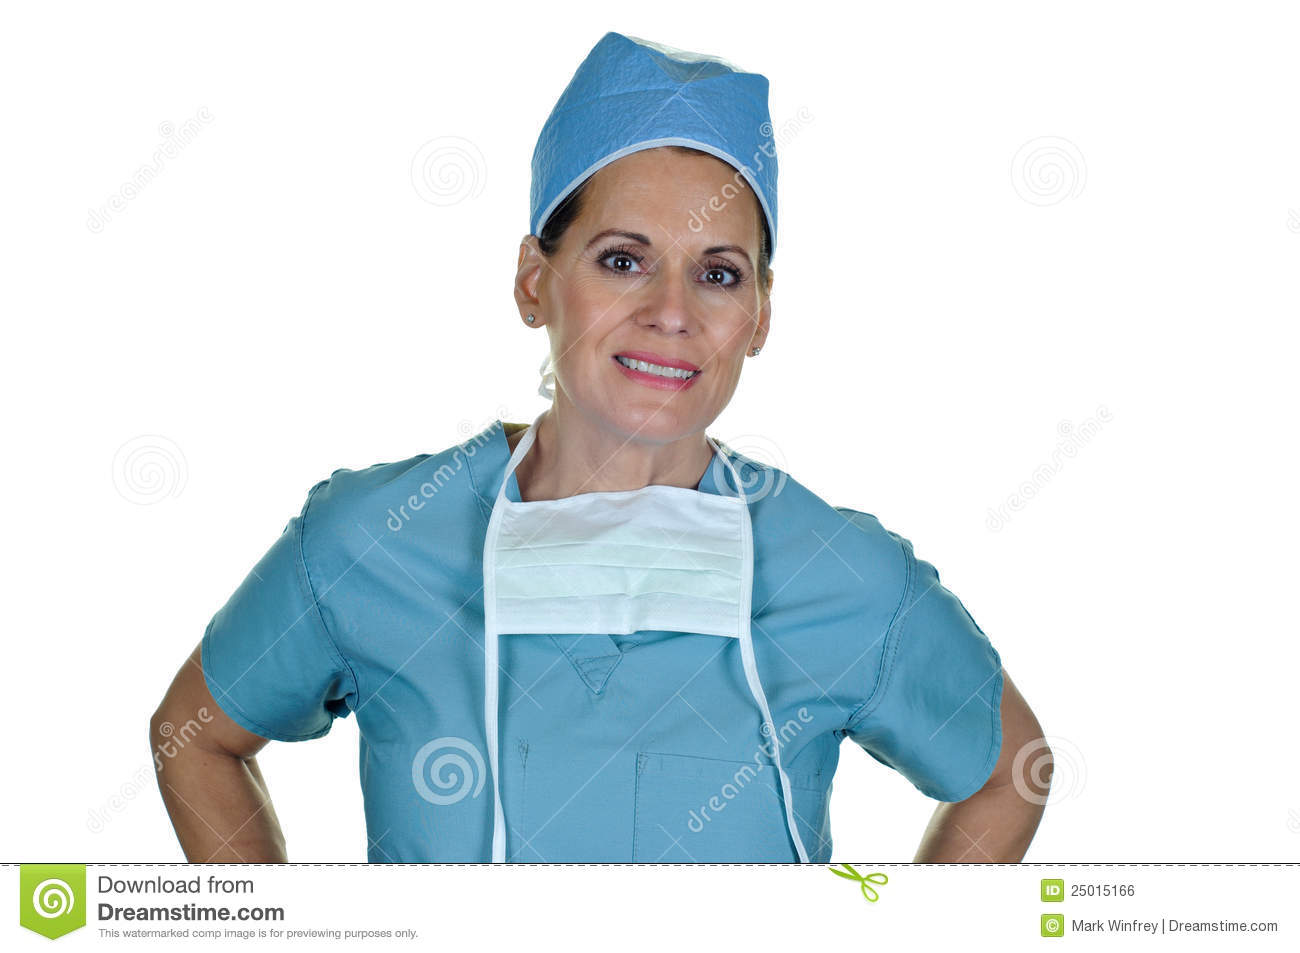 Attractive Female Surgeon Royalty Free Stock Image   Image  25015166